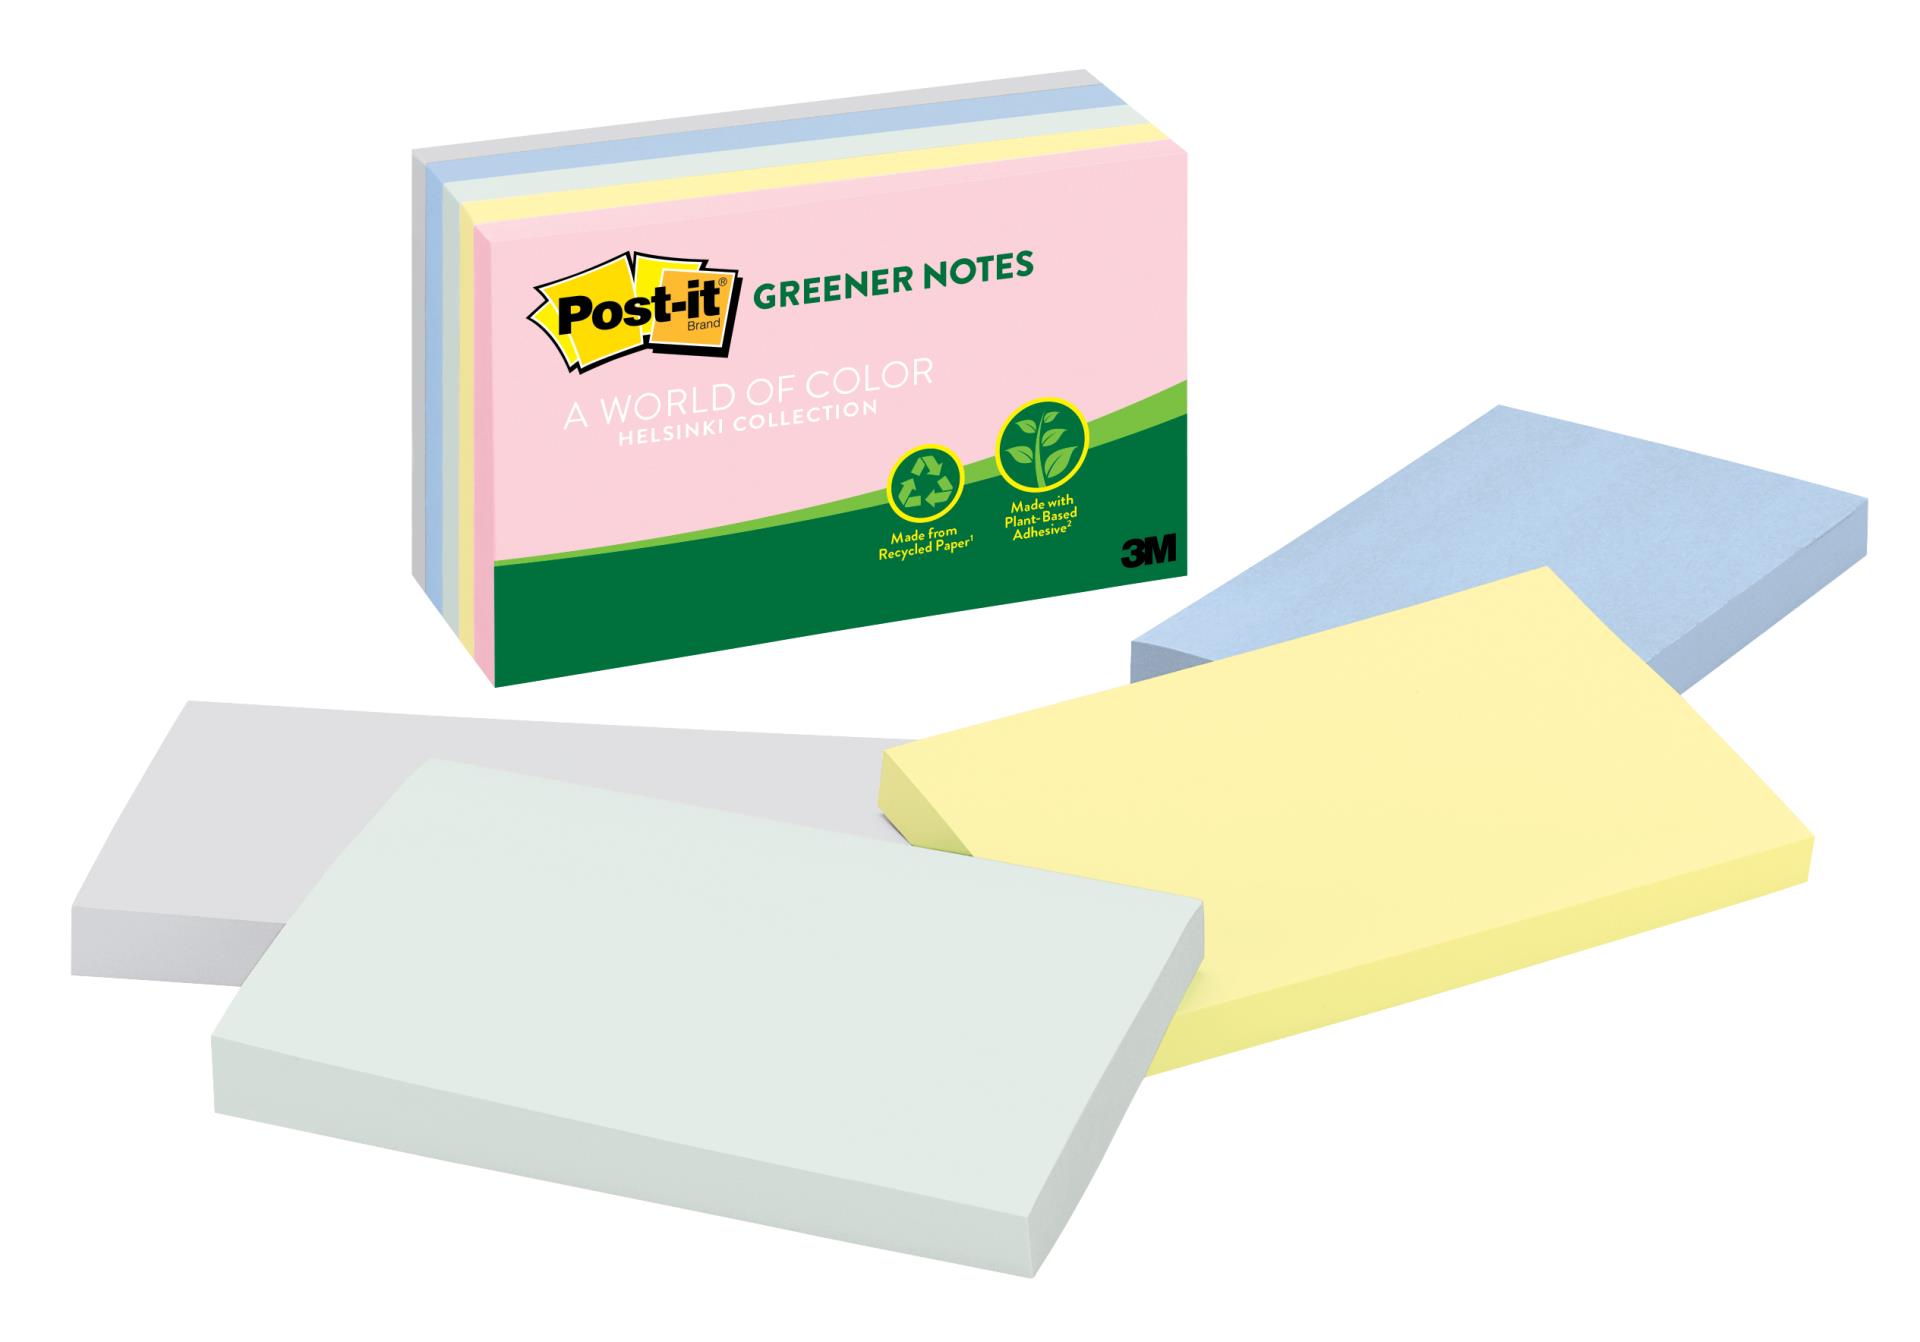 7010371016 - Post-it® Greener Notes 655-RP-A, 3 in x 5 in (76 mm x 127 mm) Helsinki Collection